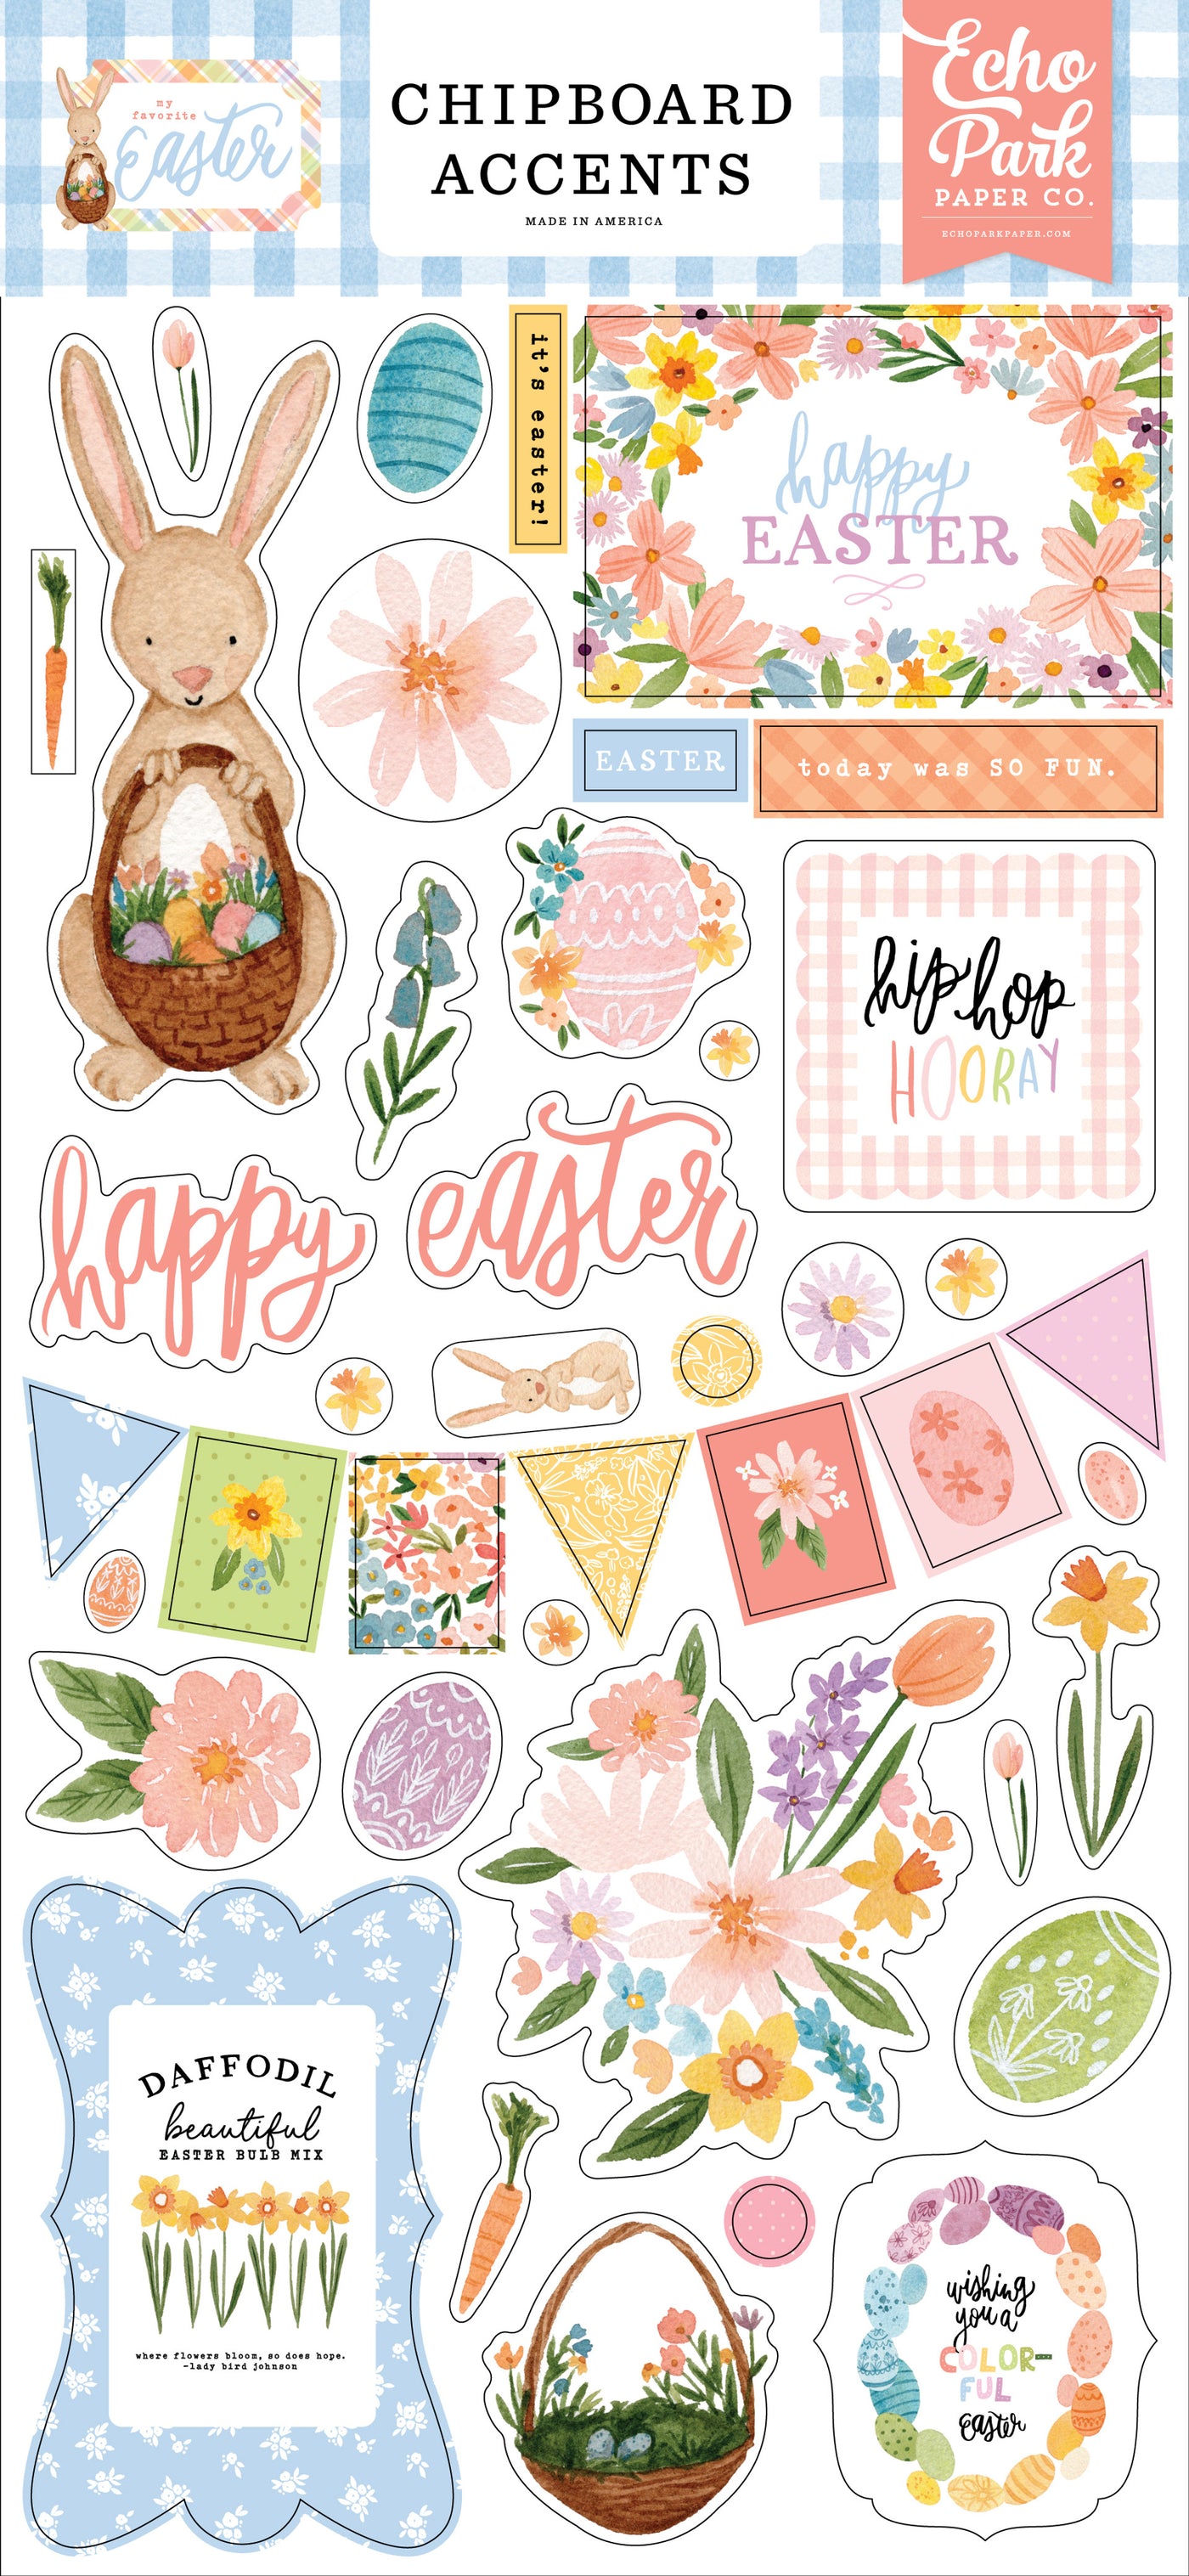 Easter accents on adhesive chipboard. Coordinates with My Favorite Easter Collection papers for springtime paper crafting.